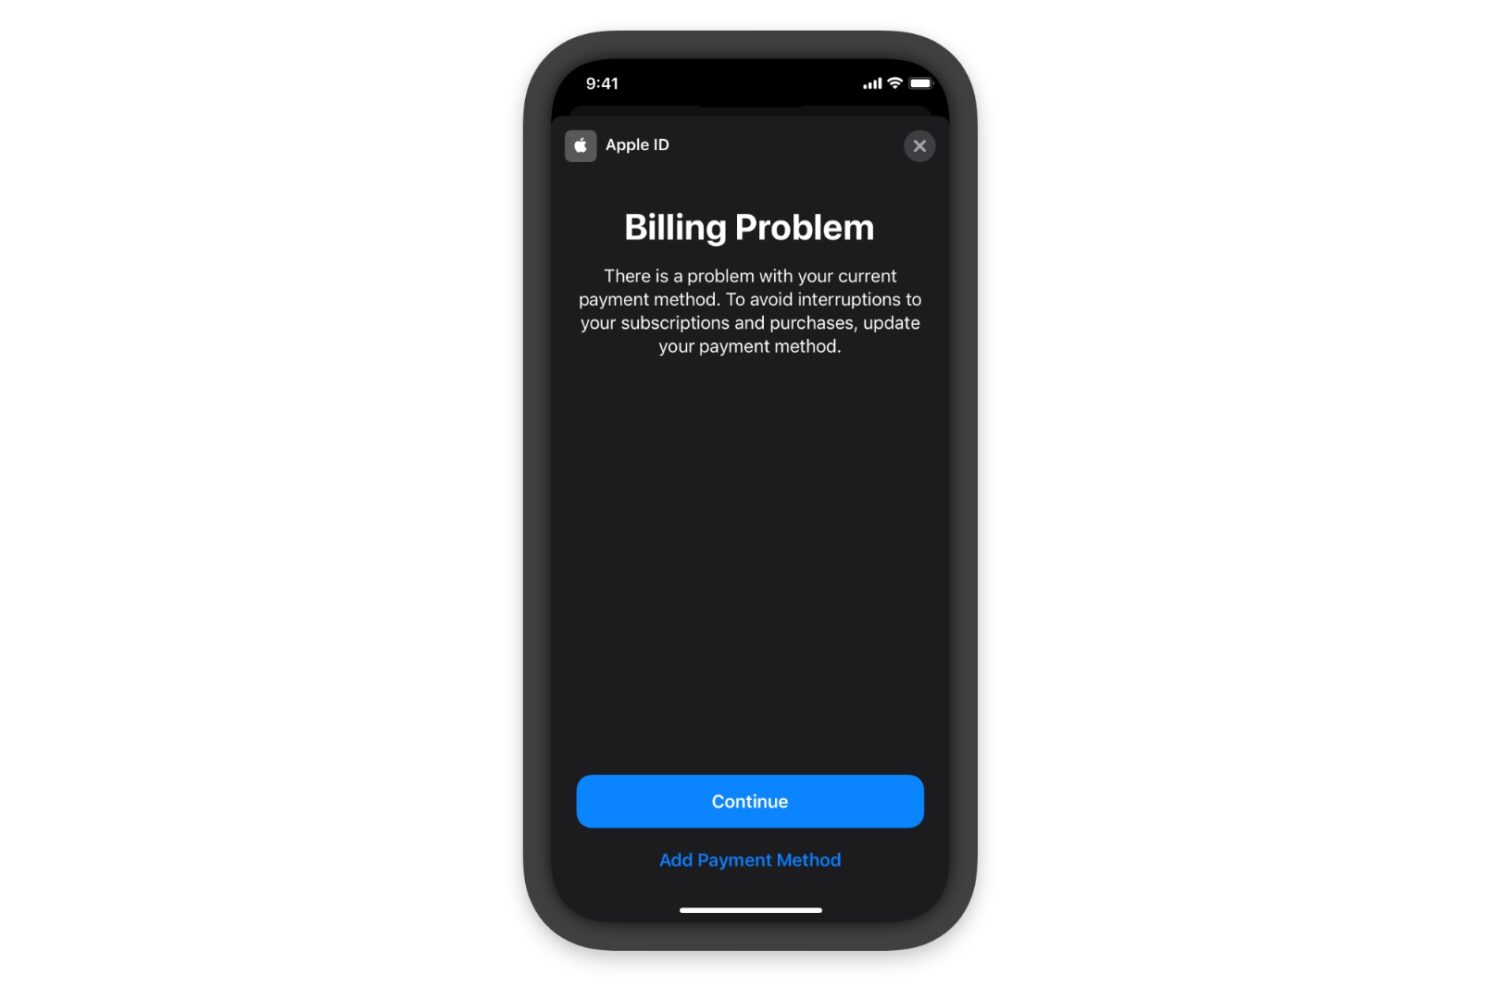 A prompt in a generic iPhone app warning the user about a subscription billing problem